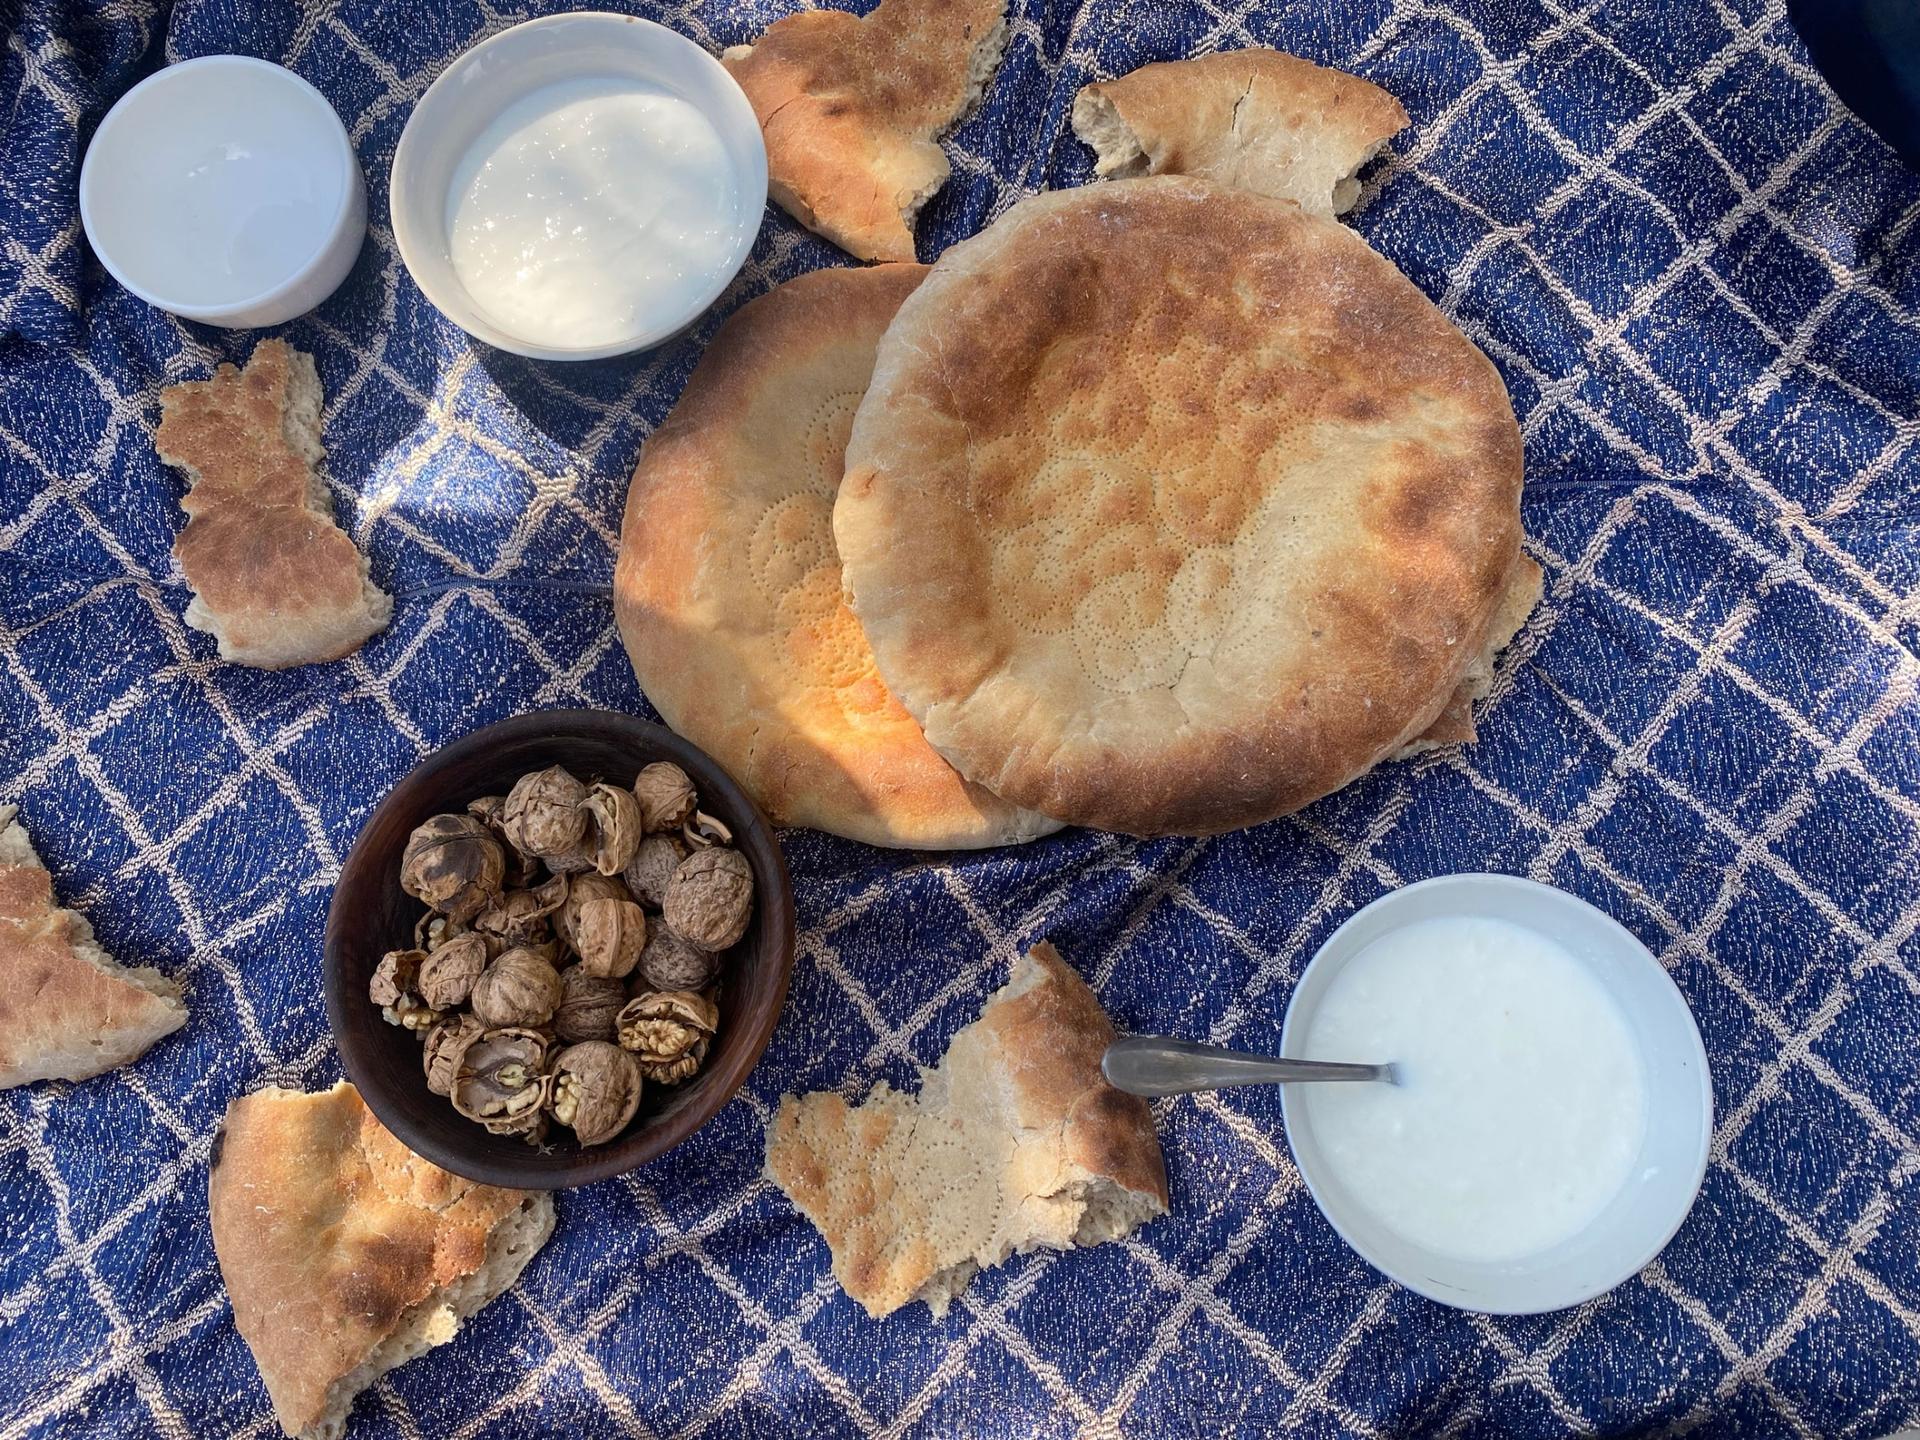 During harvest time in southern Kyrgyzstan, walnuts are served in dishes alongside most meals.